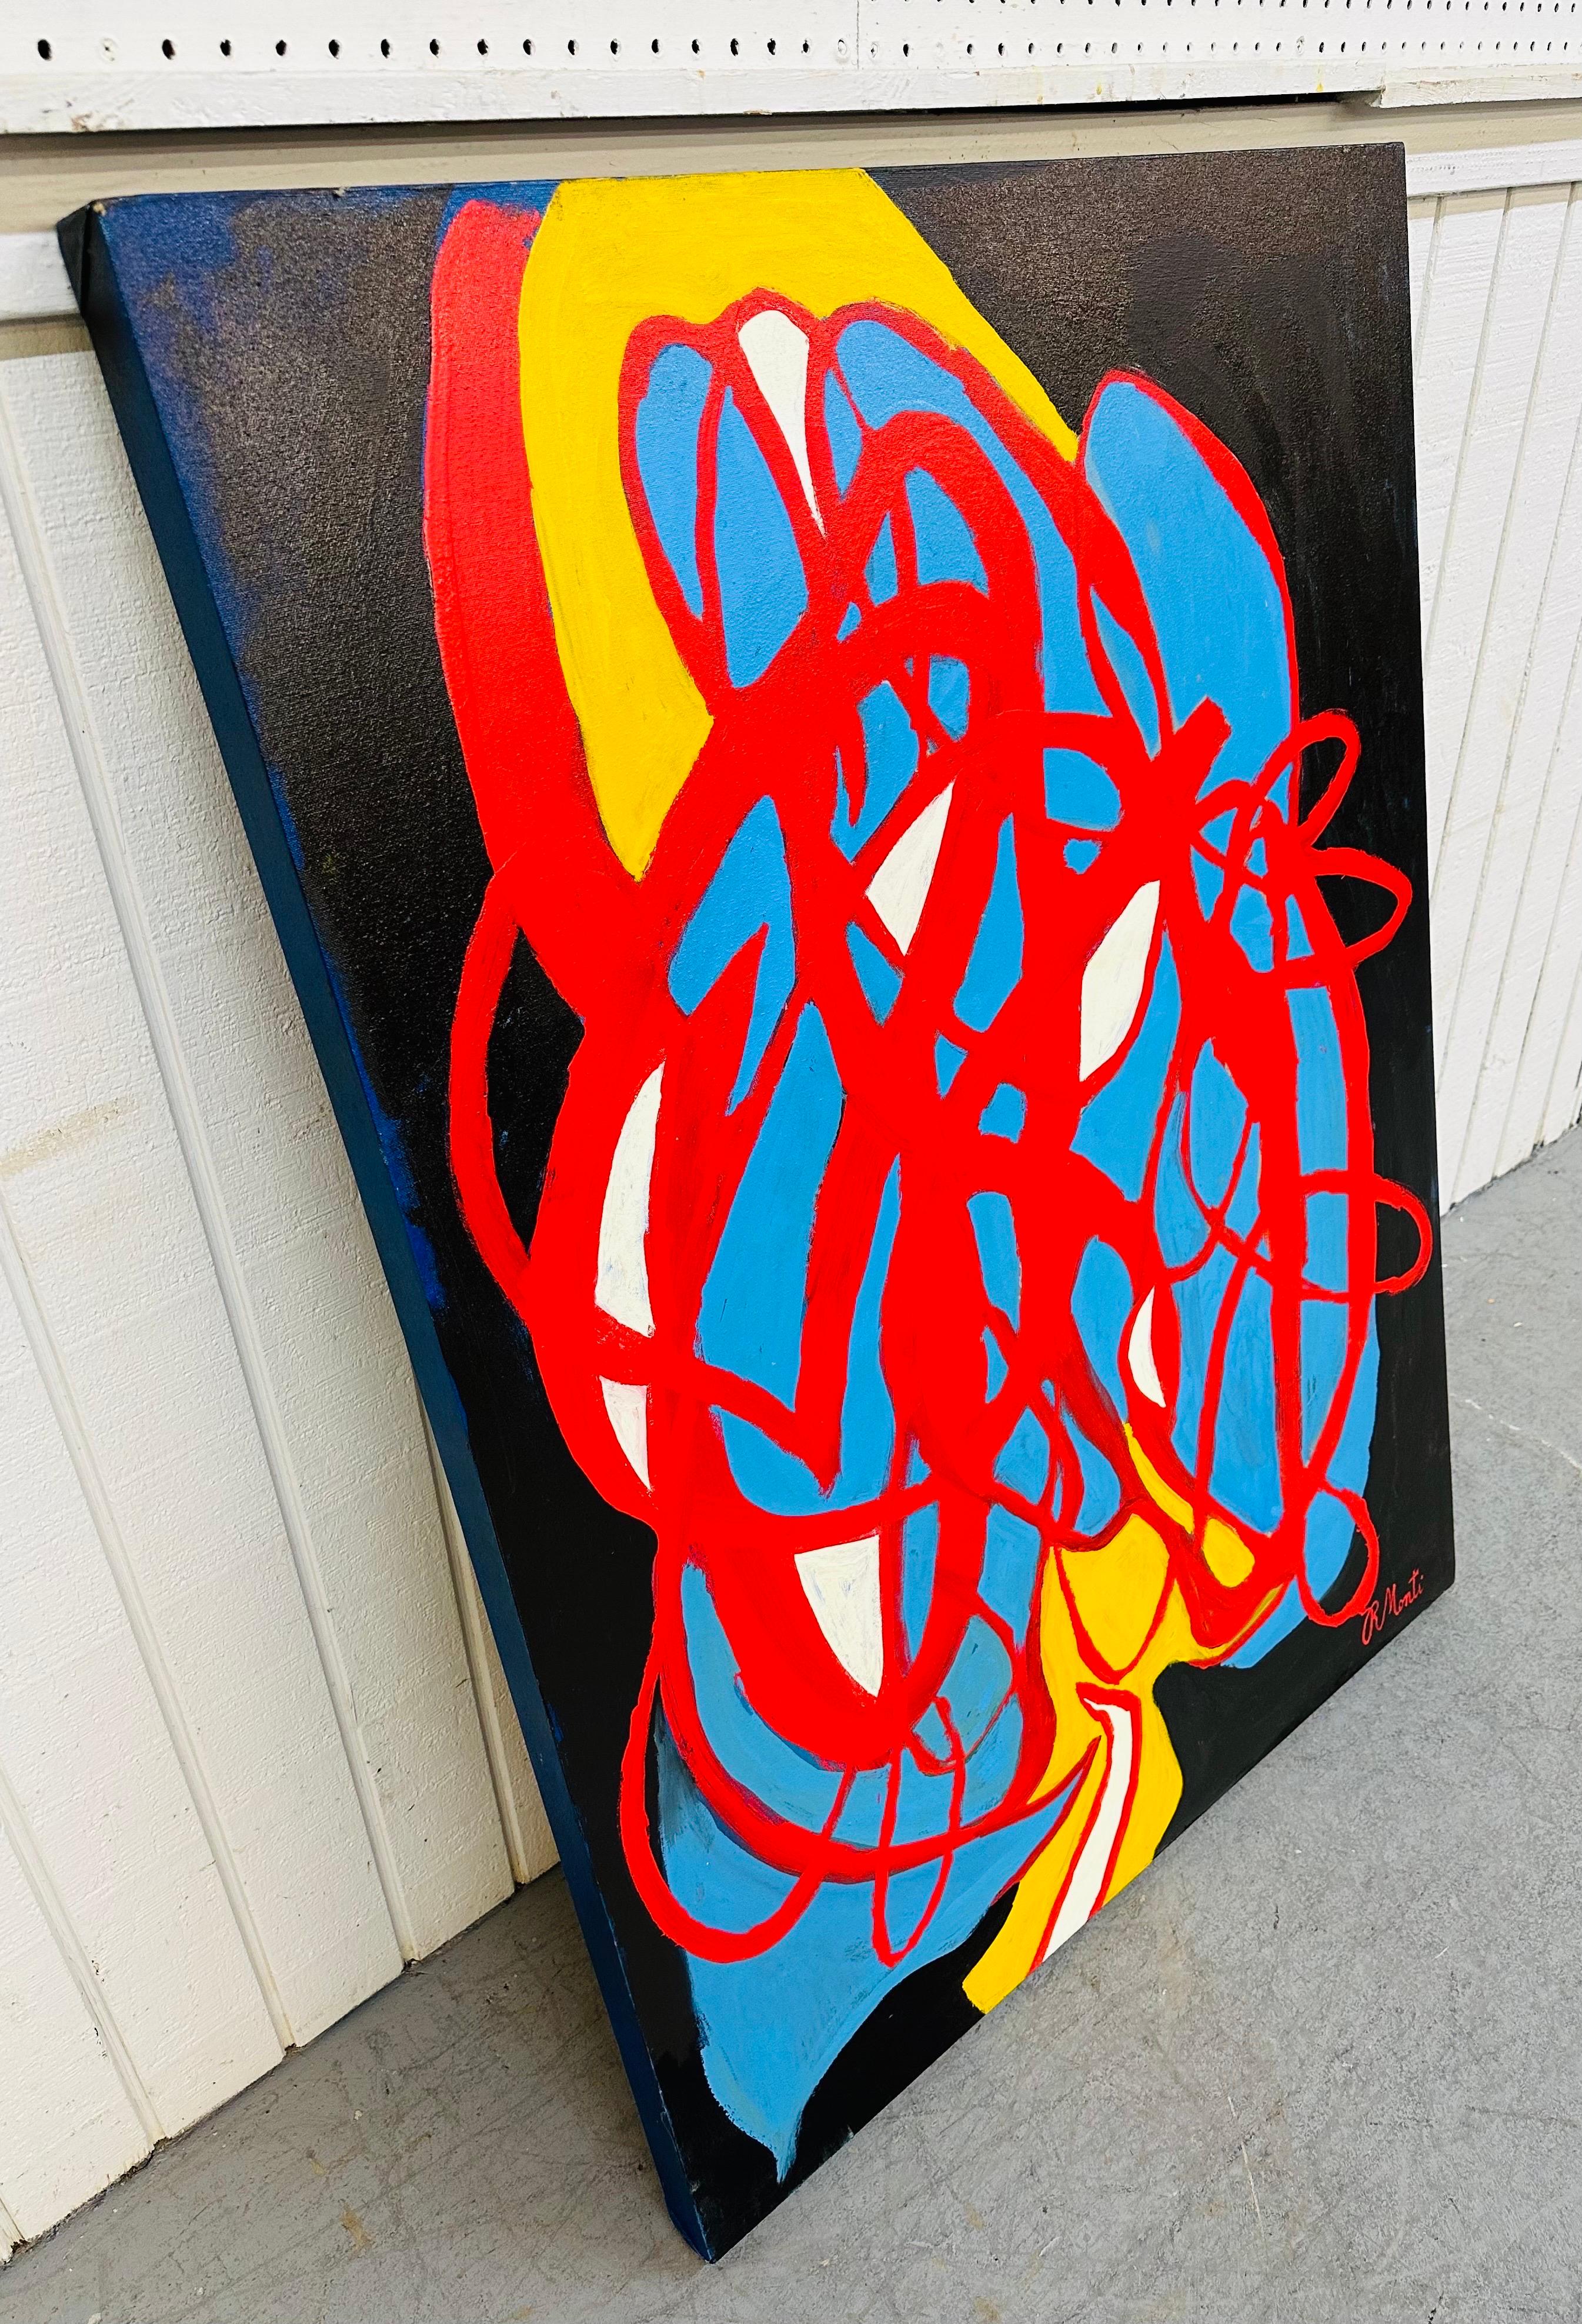 This listing is for a Modern Abstract Painting Signed R. Monti. Featuring a rectangular shape, an array of colors over a black background, and a signed bottom left corner. This is an exceptional piece of art by listed artist R. Monti.